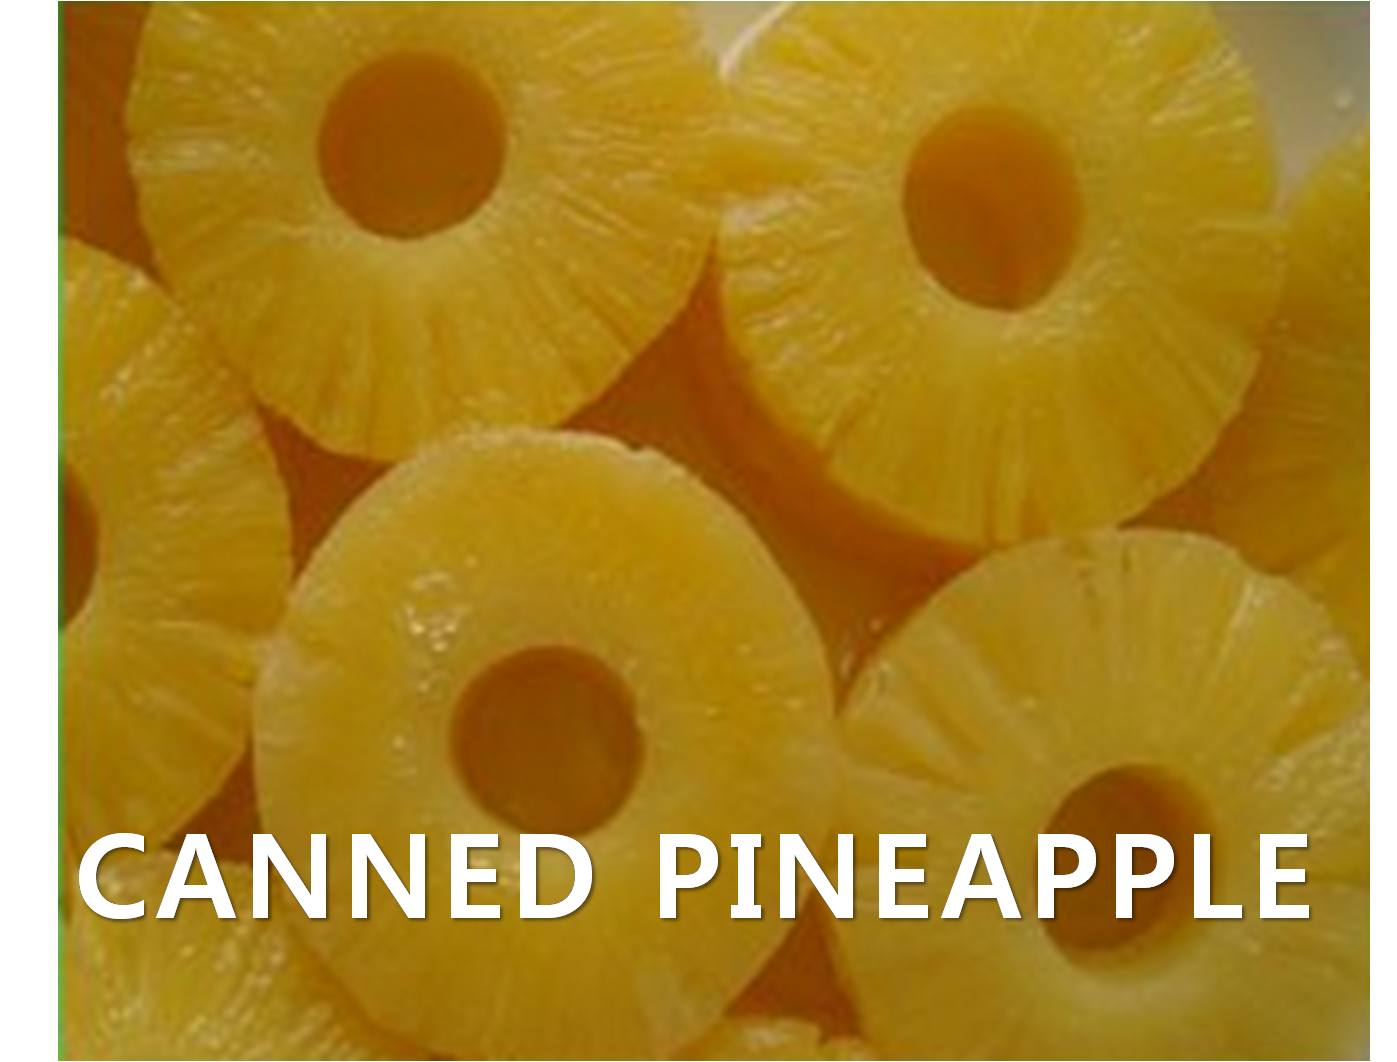 OTHERS,PineappleCanned,import by Hainong. co.,Ltd. http://www.hainong.com